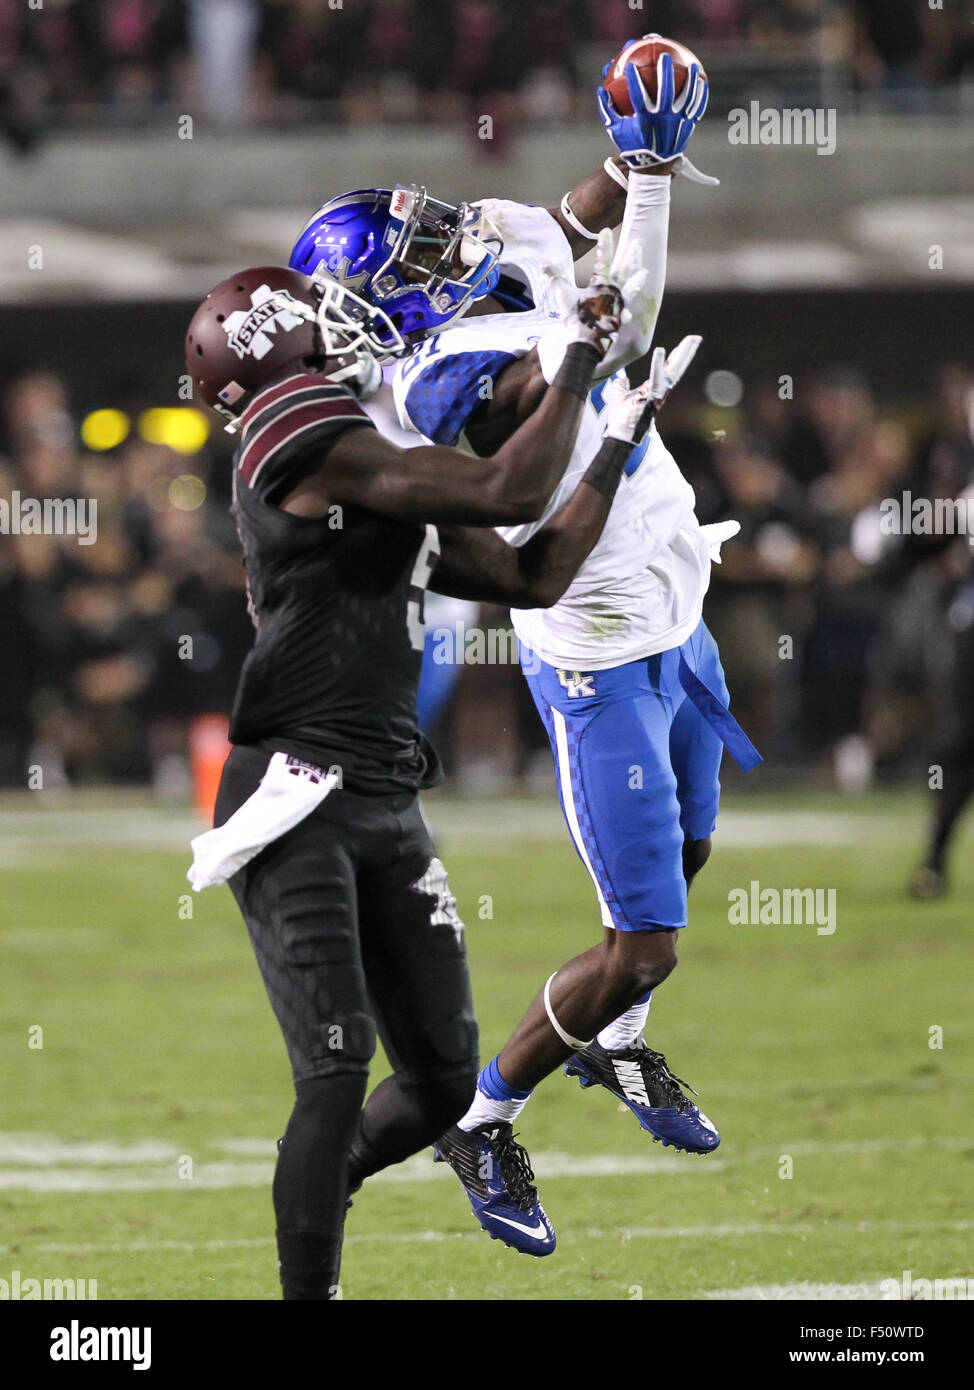 Starkville, MS, USA. 24th Oct, 2015. Kentucky Wildcats safety Mike Edwards (27) intercepts a pass over Mississippi State Bulldogs wide receiver Donald Gray (6) during the NCAA Football game between the Mississippi State Bulldogs and the Kentucky Wildcats at Davis Wade Stadium in Starkville, MS. Chuck Lick/CSM/Alamy Live News Stock Photo